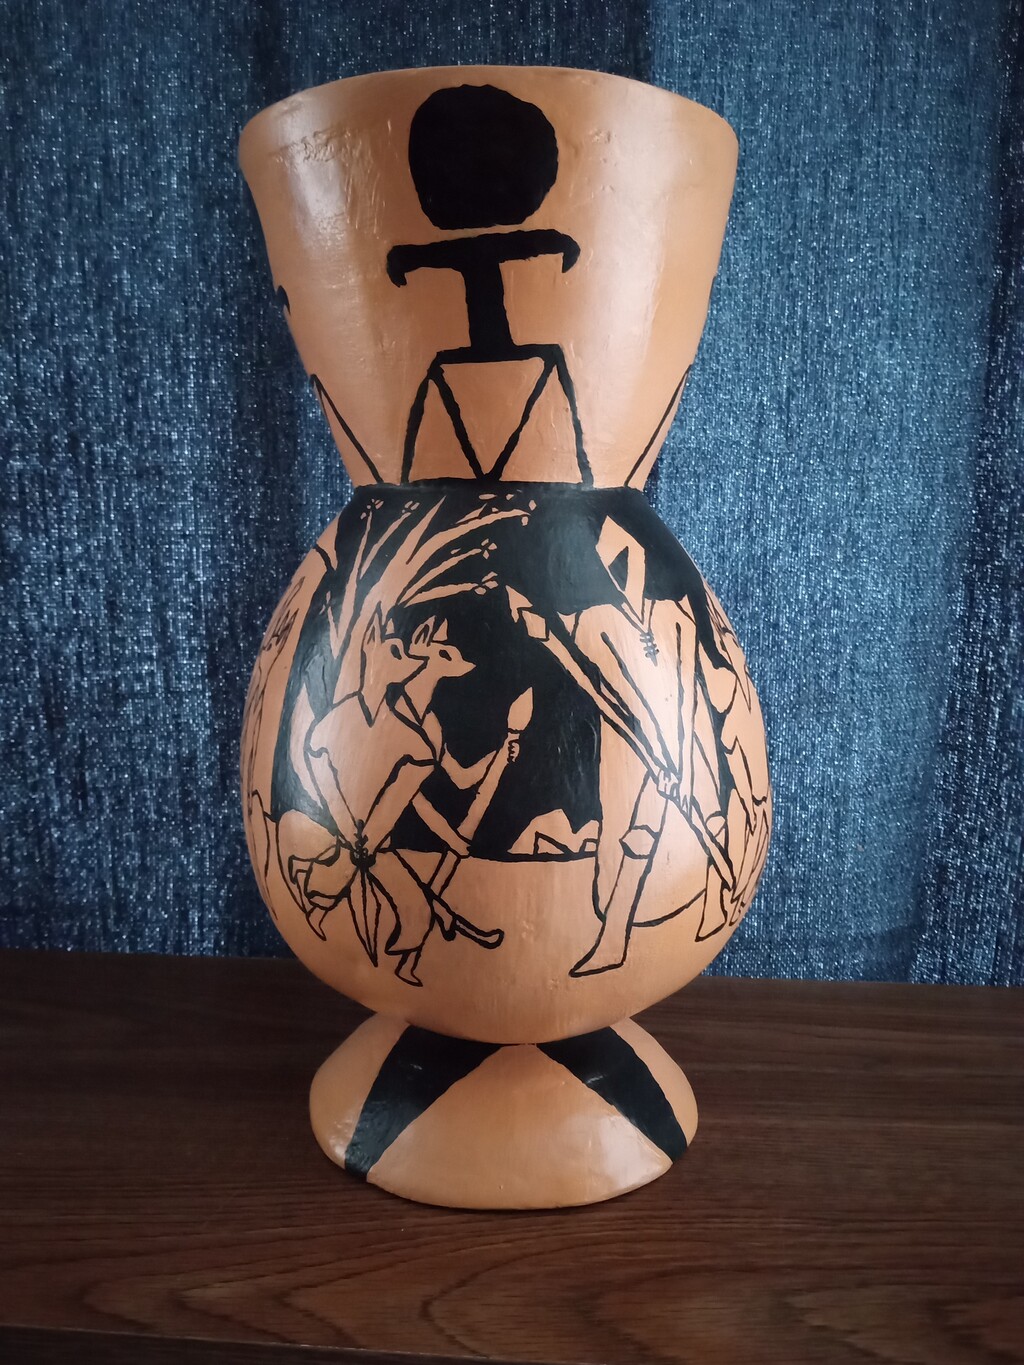 Vase From High School - View 3 of 4 